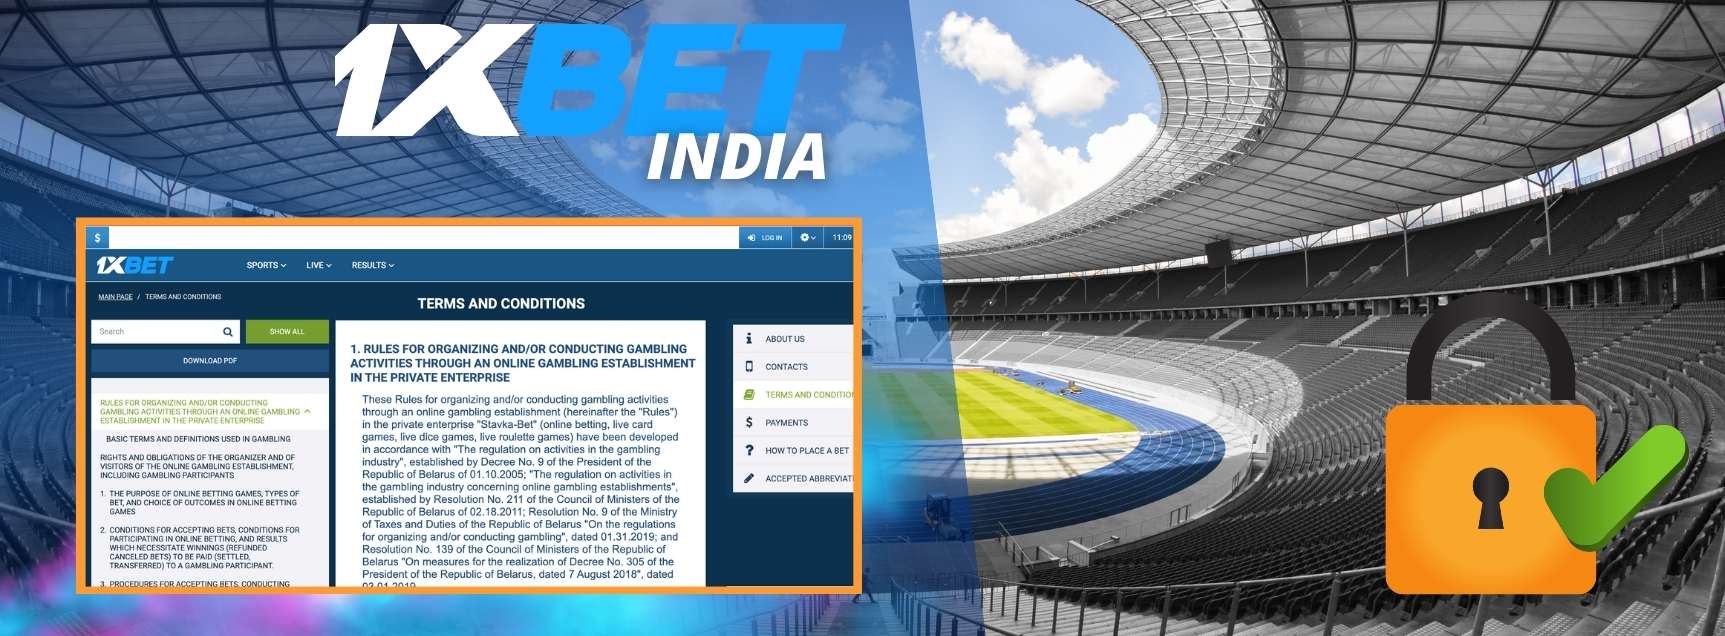 india betting site 1xBet key features